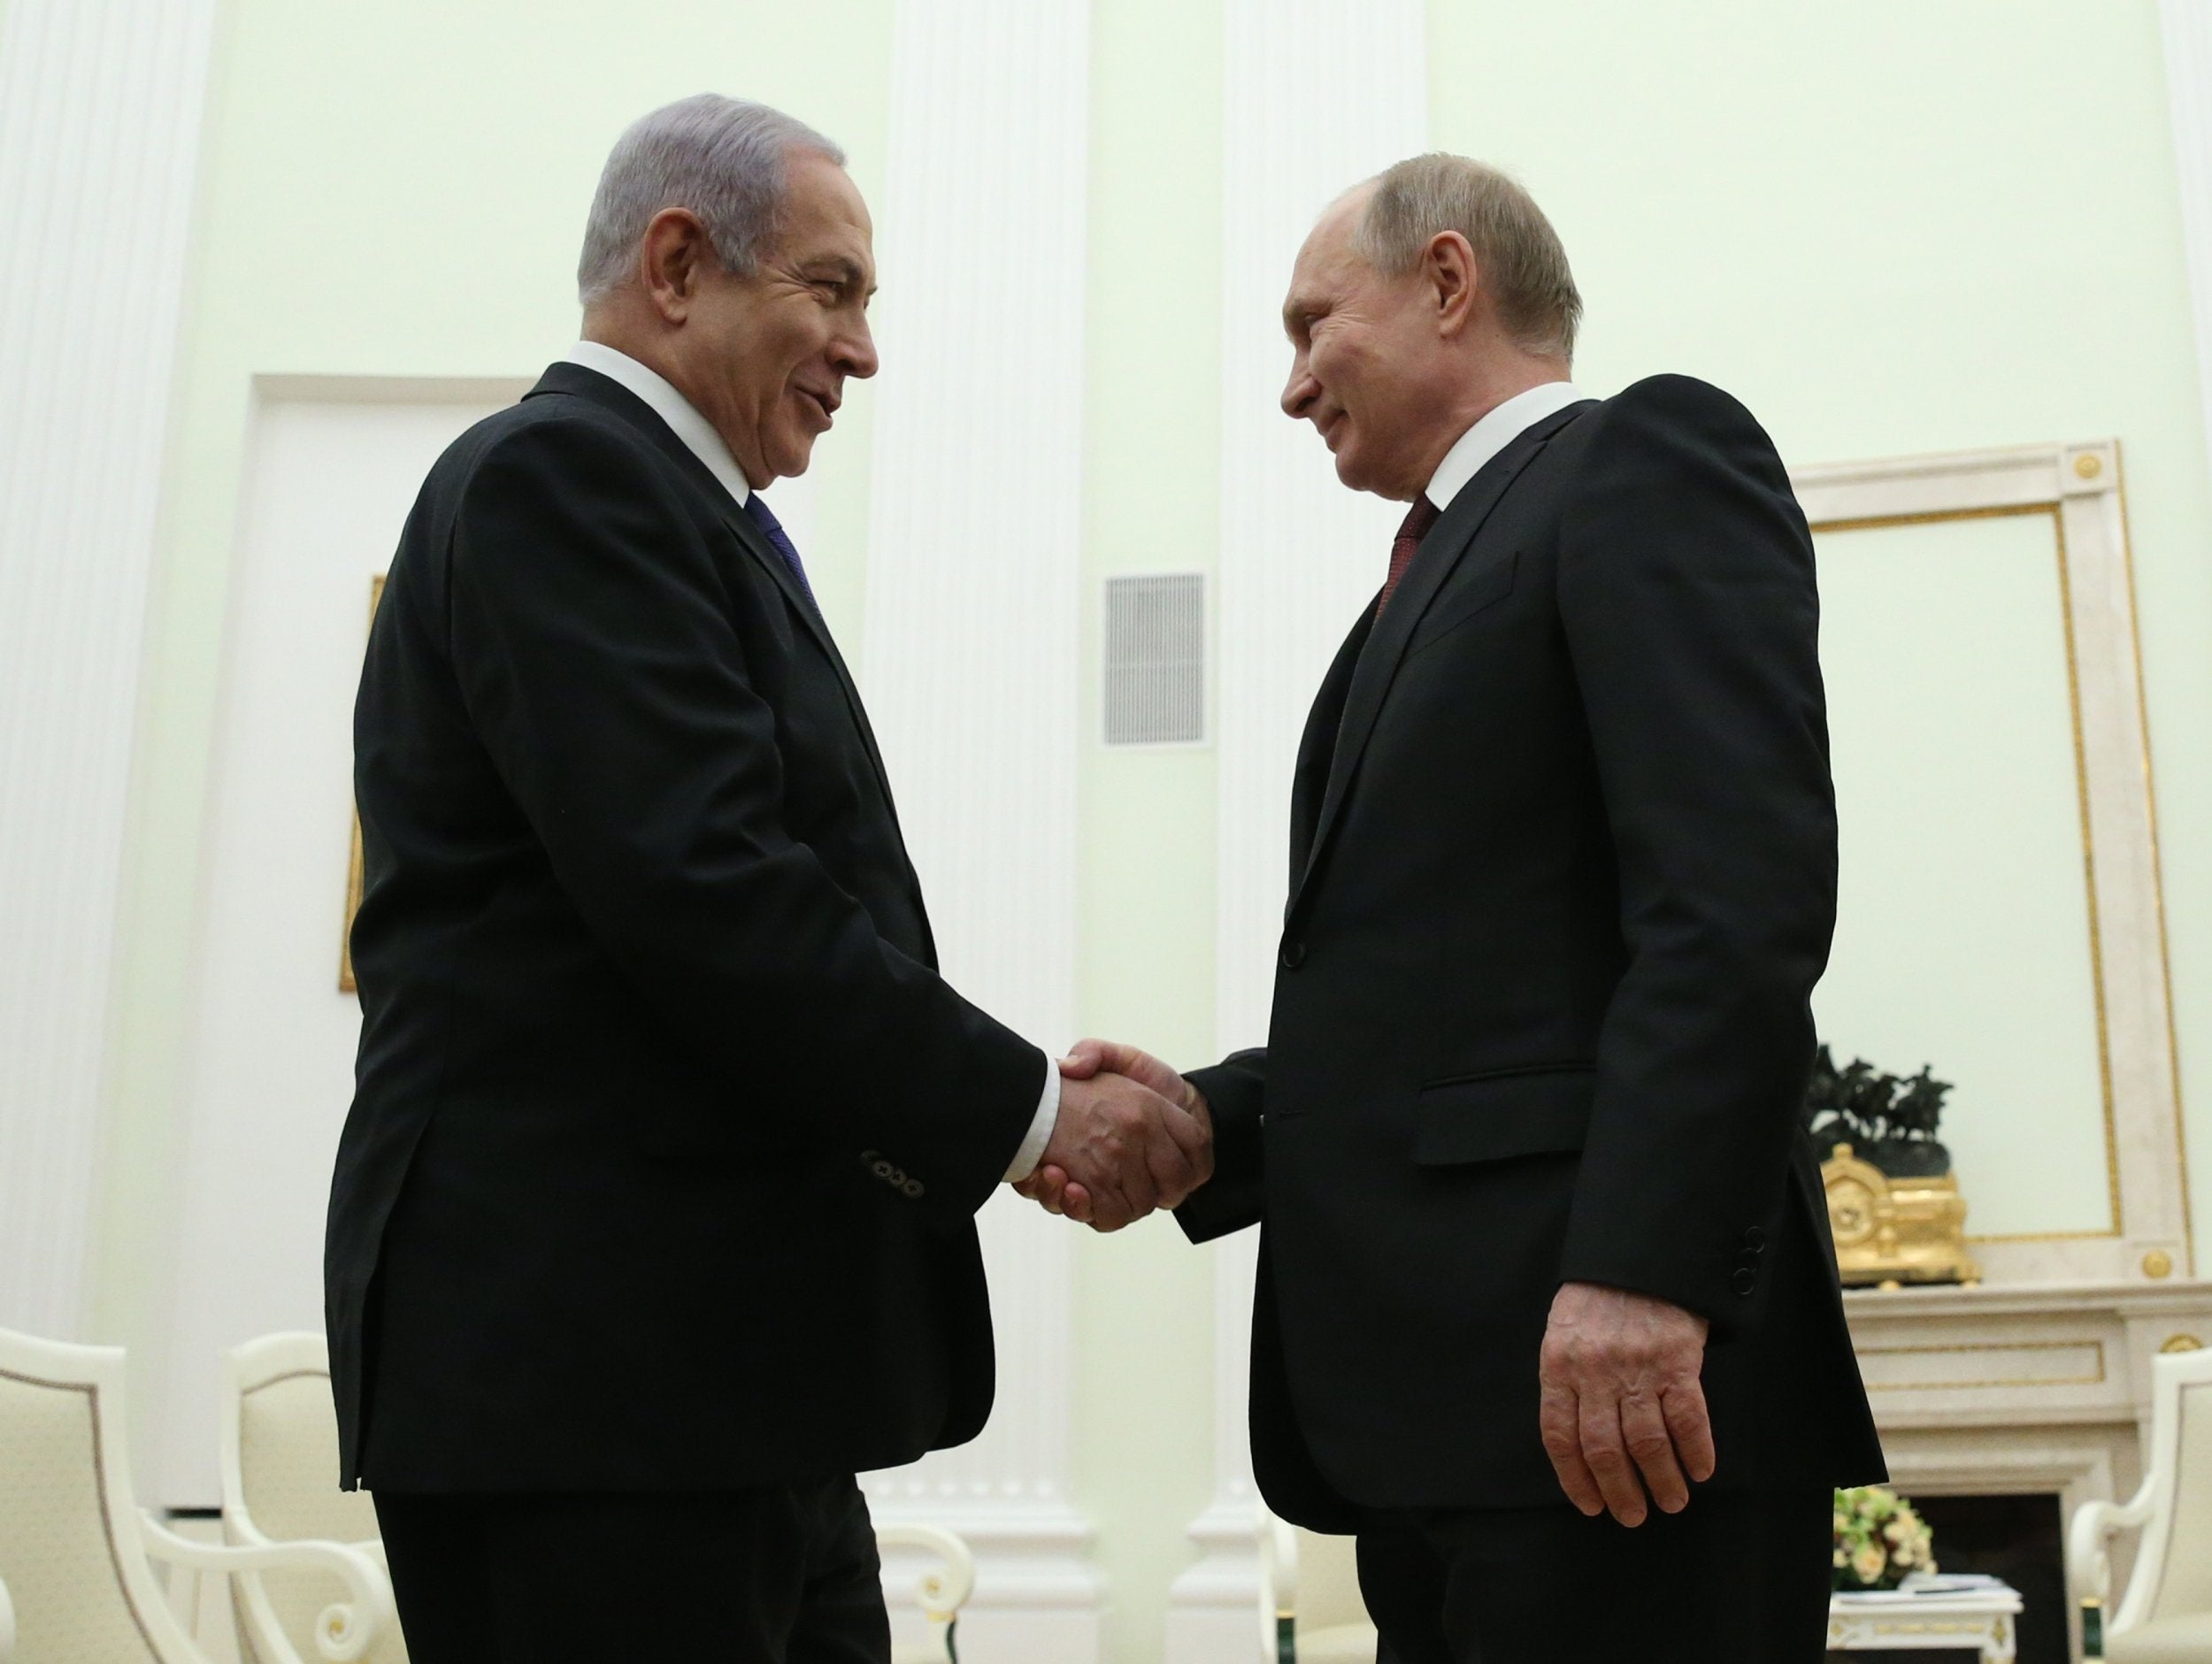 Benjamin Netanyahu shortened an already delayed visit to Russia as problems mount ahead of April general elections